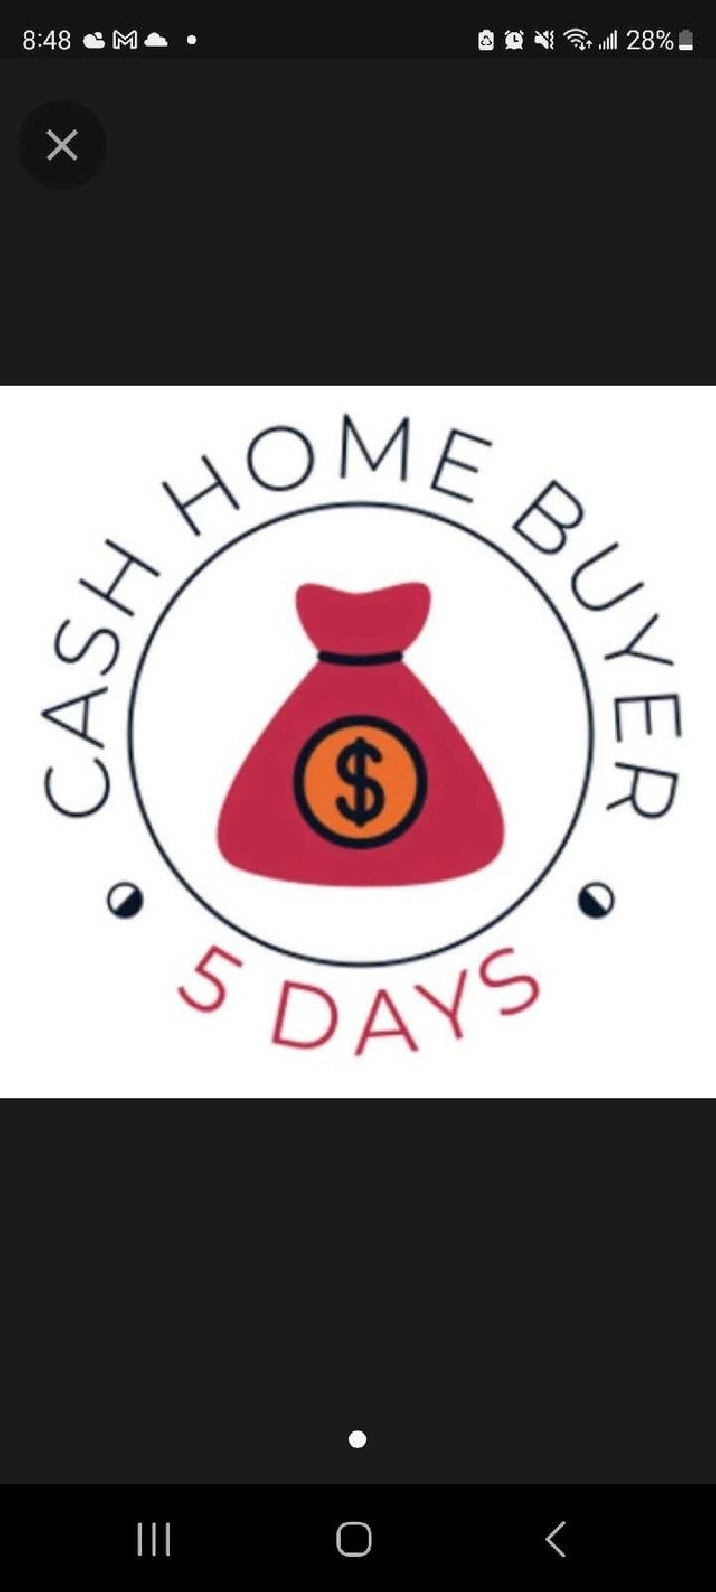 ⭐️⭐️⭐️⭐️⭐️Sell Your Home In Days Not Months in Calgary,AB - Houses for Sale